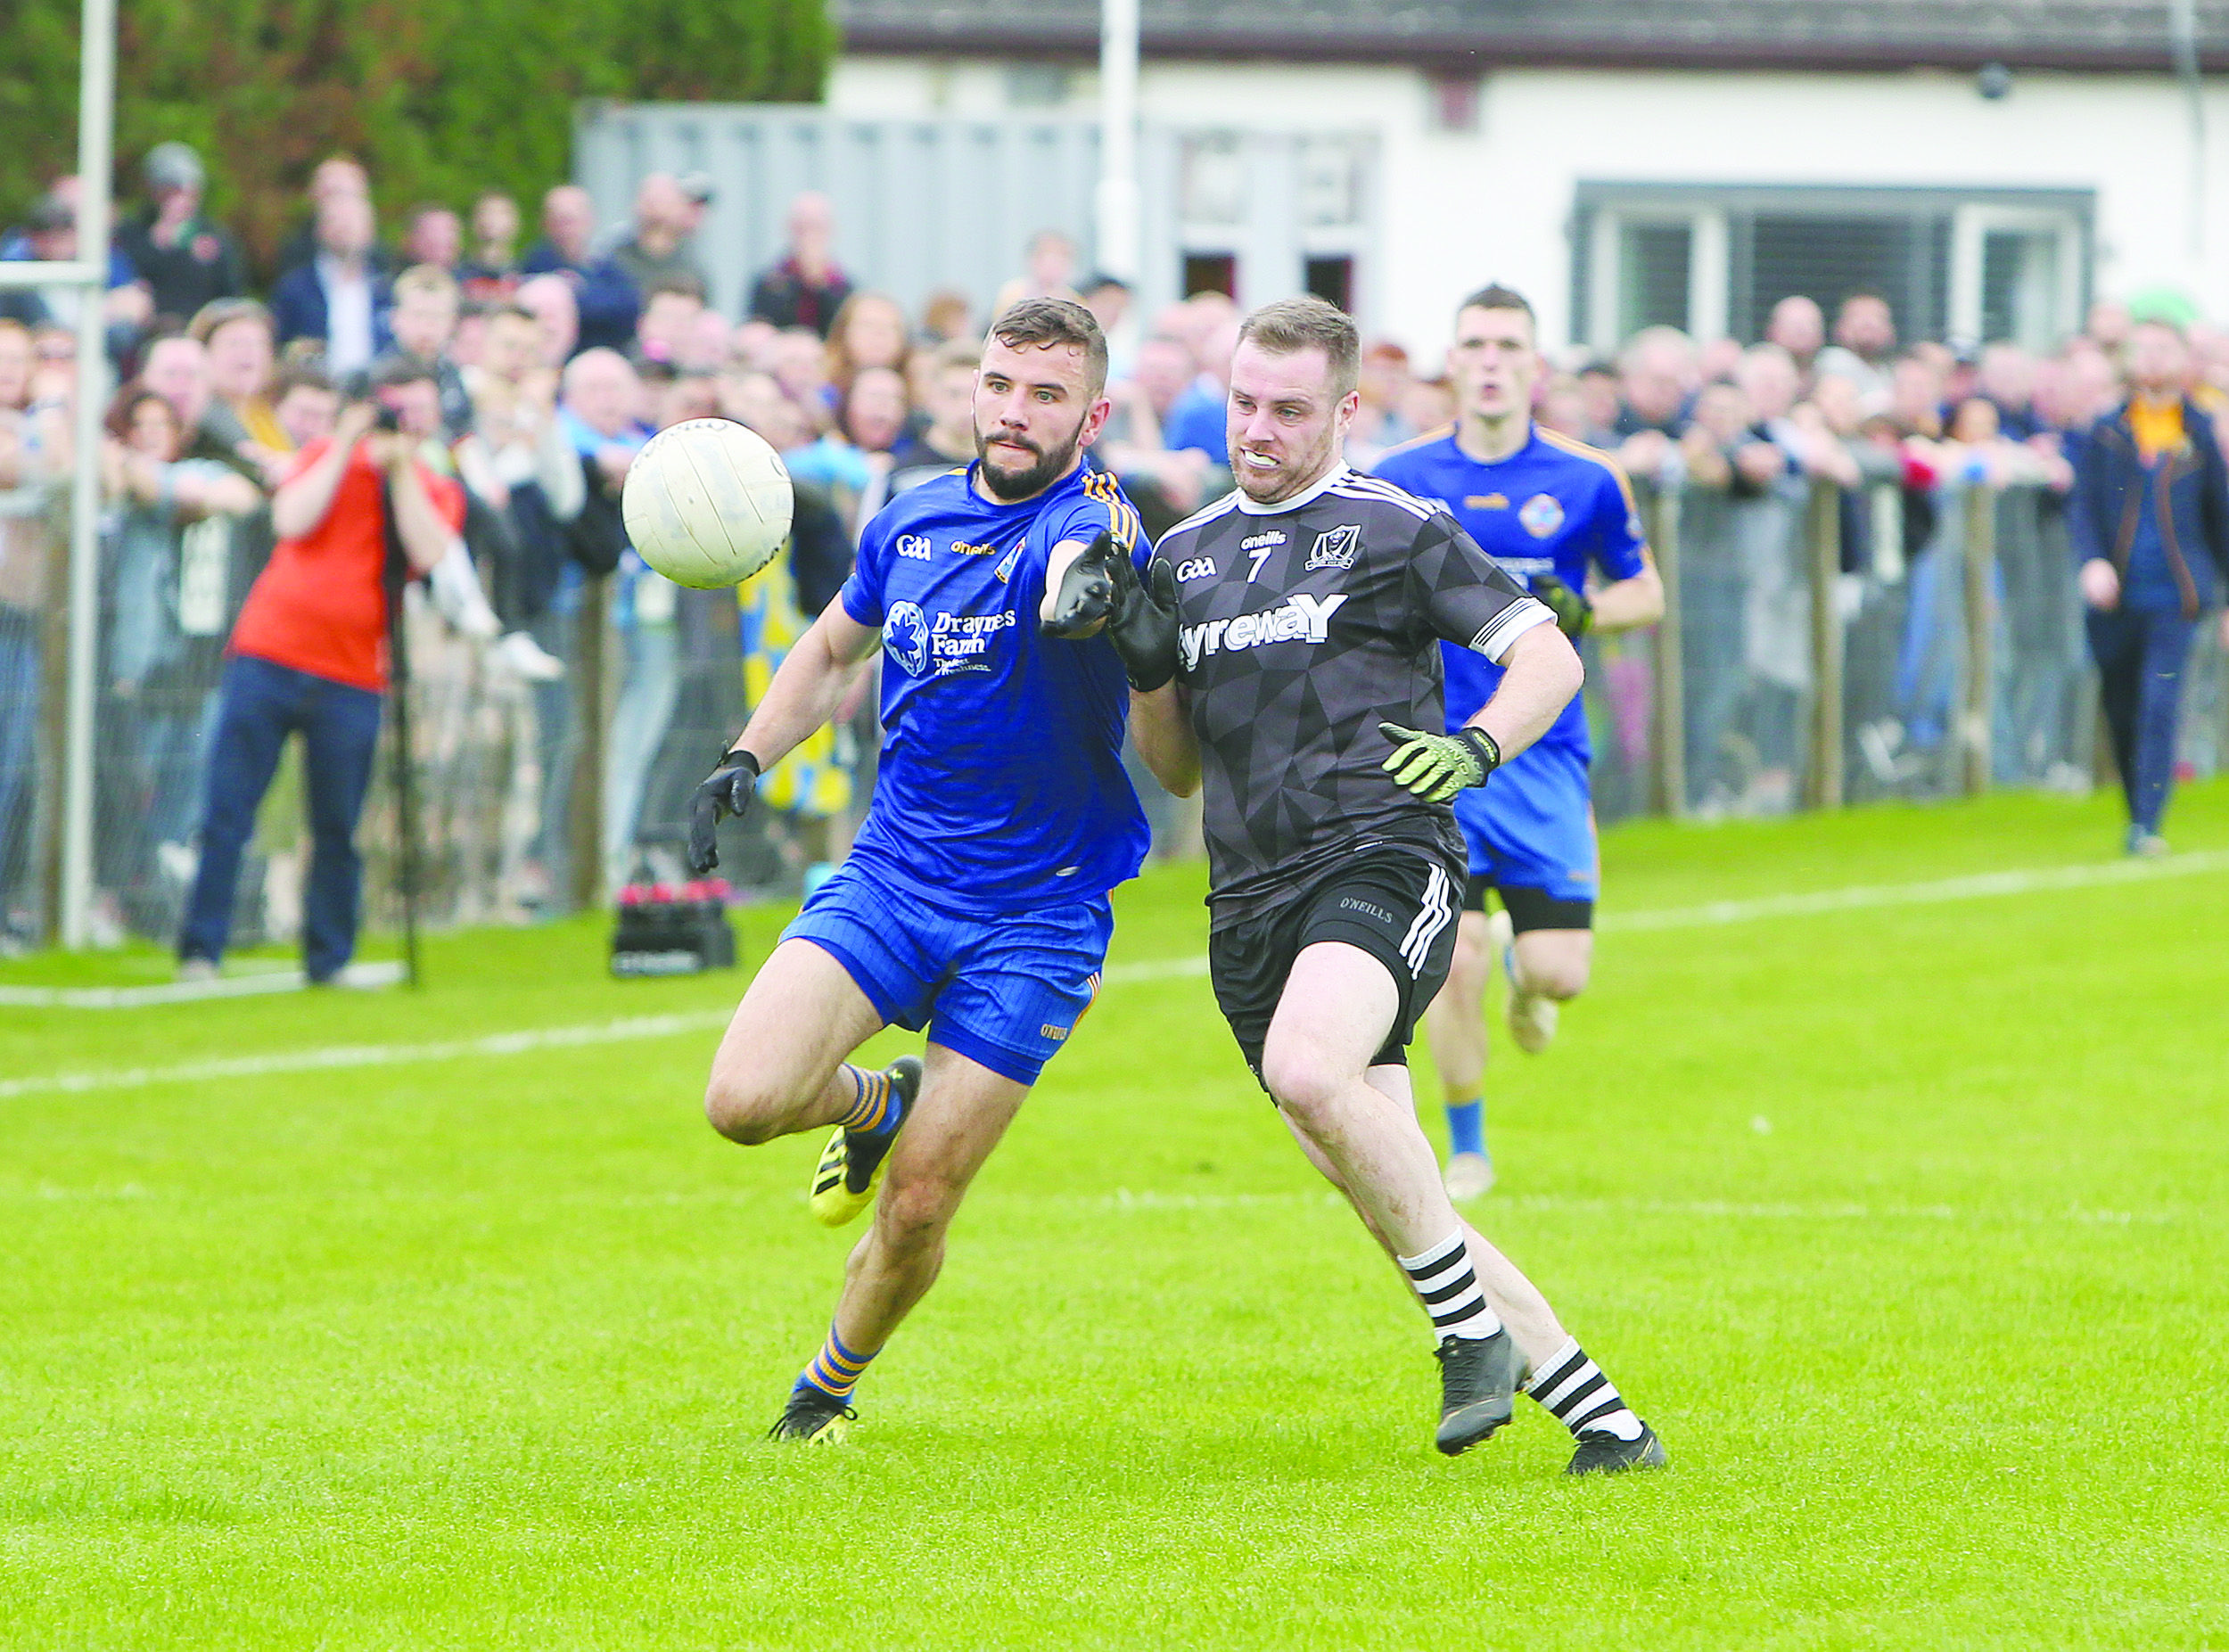 Ardoyne lost out in last year’s final to St Patrick’s, Lisburn